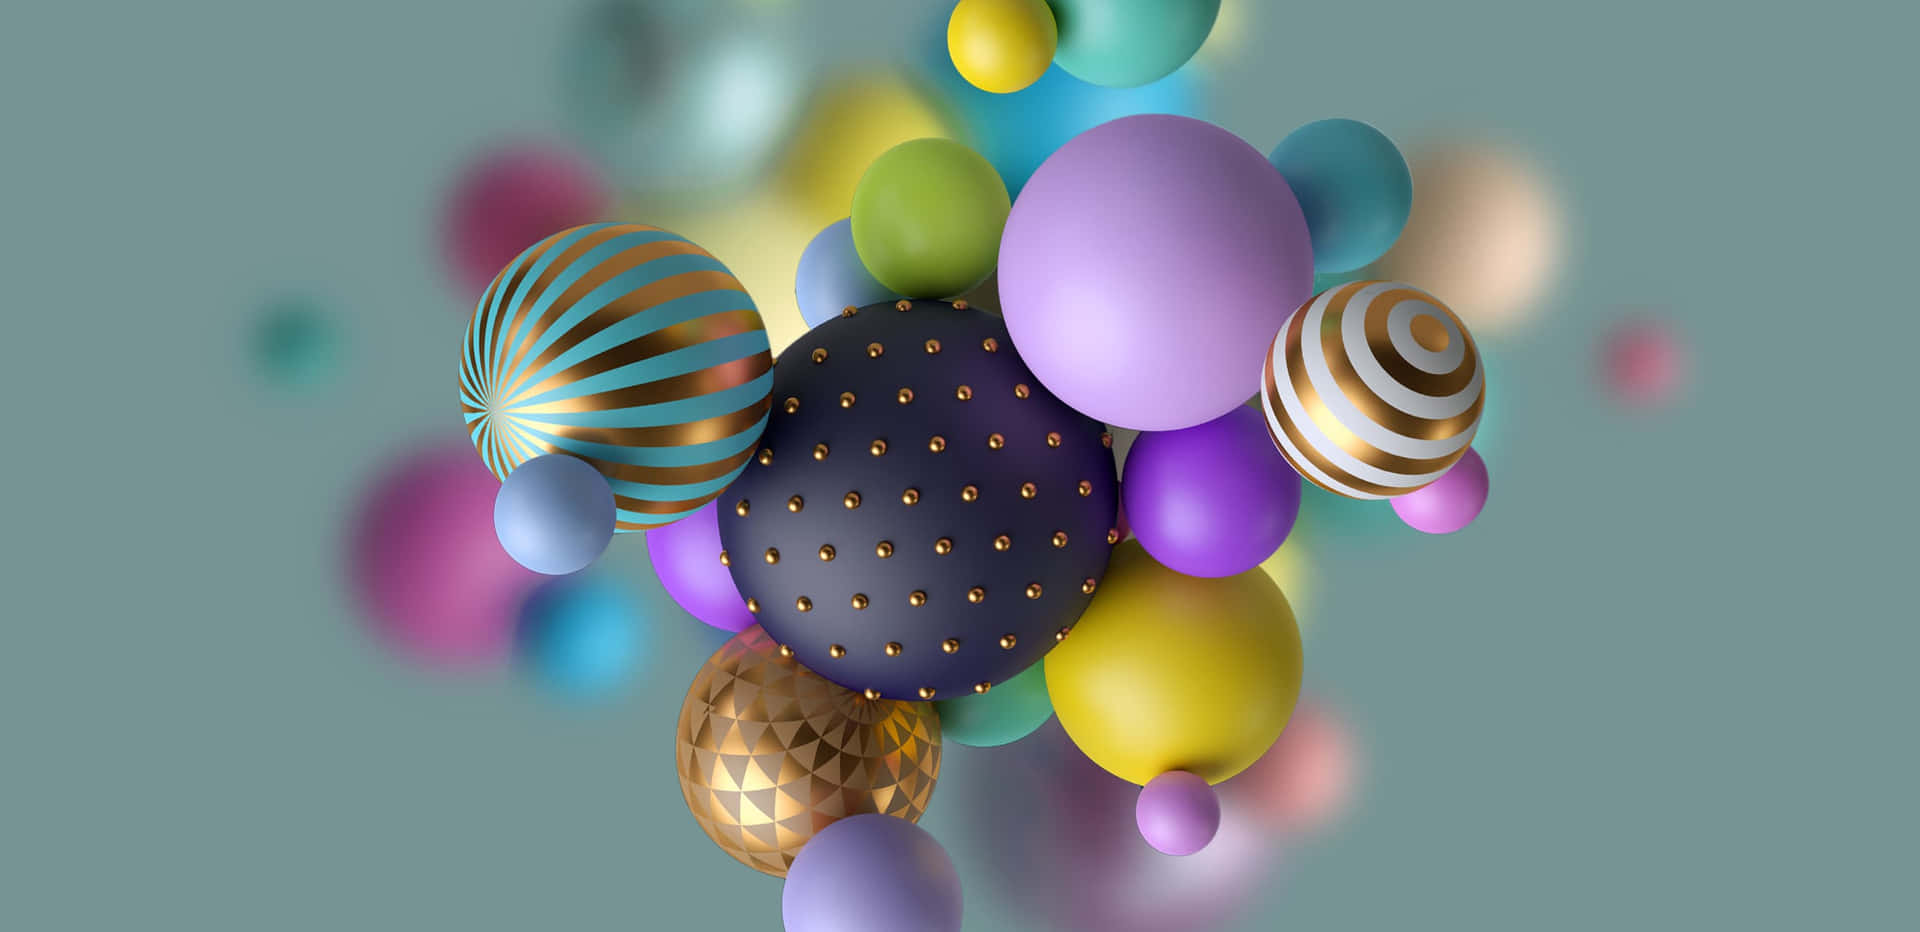 Colorful Balls Floating In The Air Wallpaper